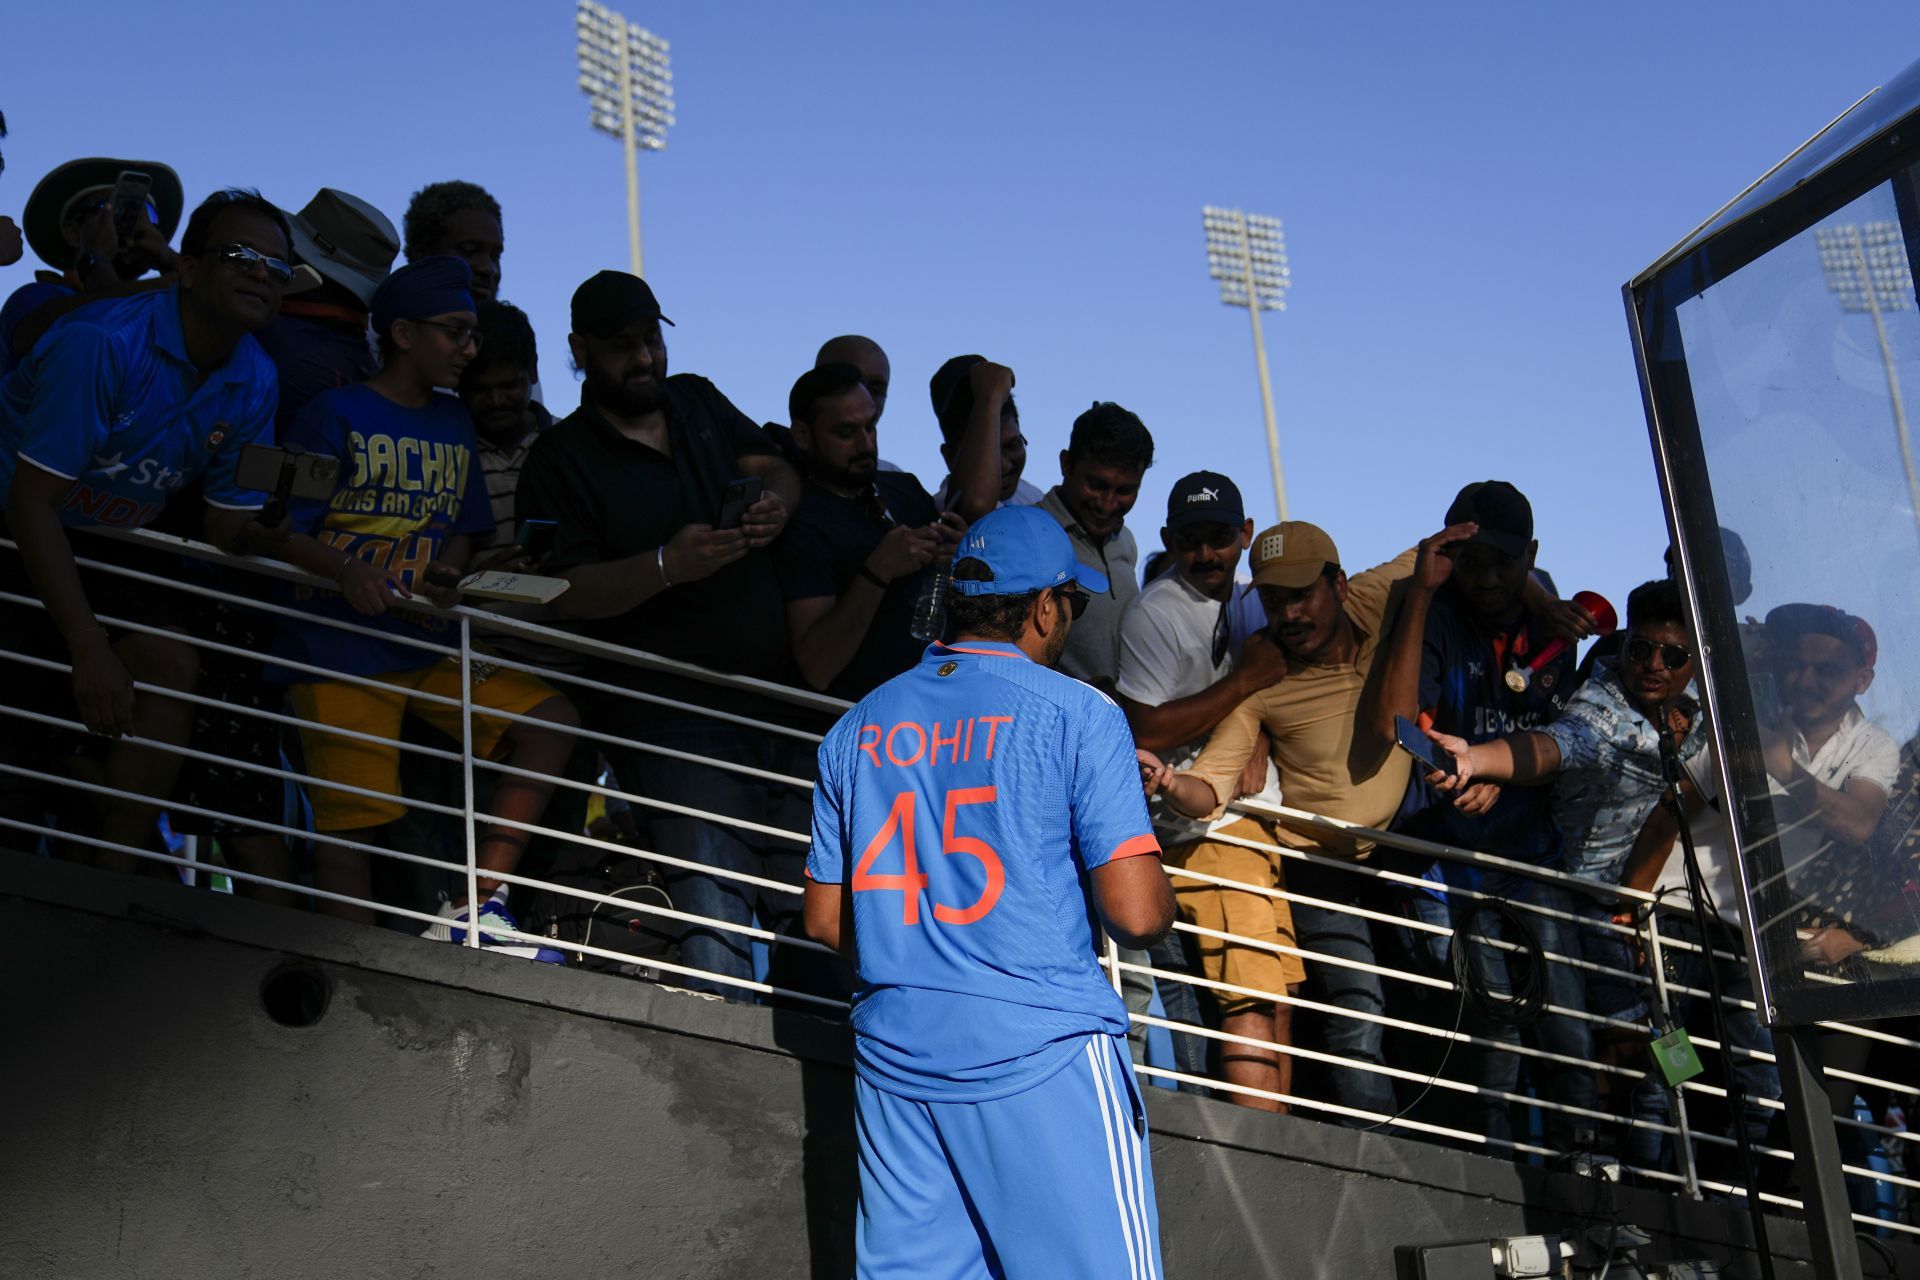 The Indian opener signs autograph after the third ODI against West Indies (Pic: AP Photo/Ramon Espinosa)